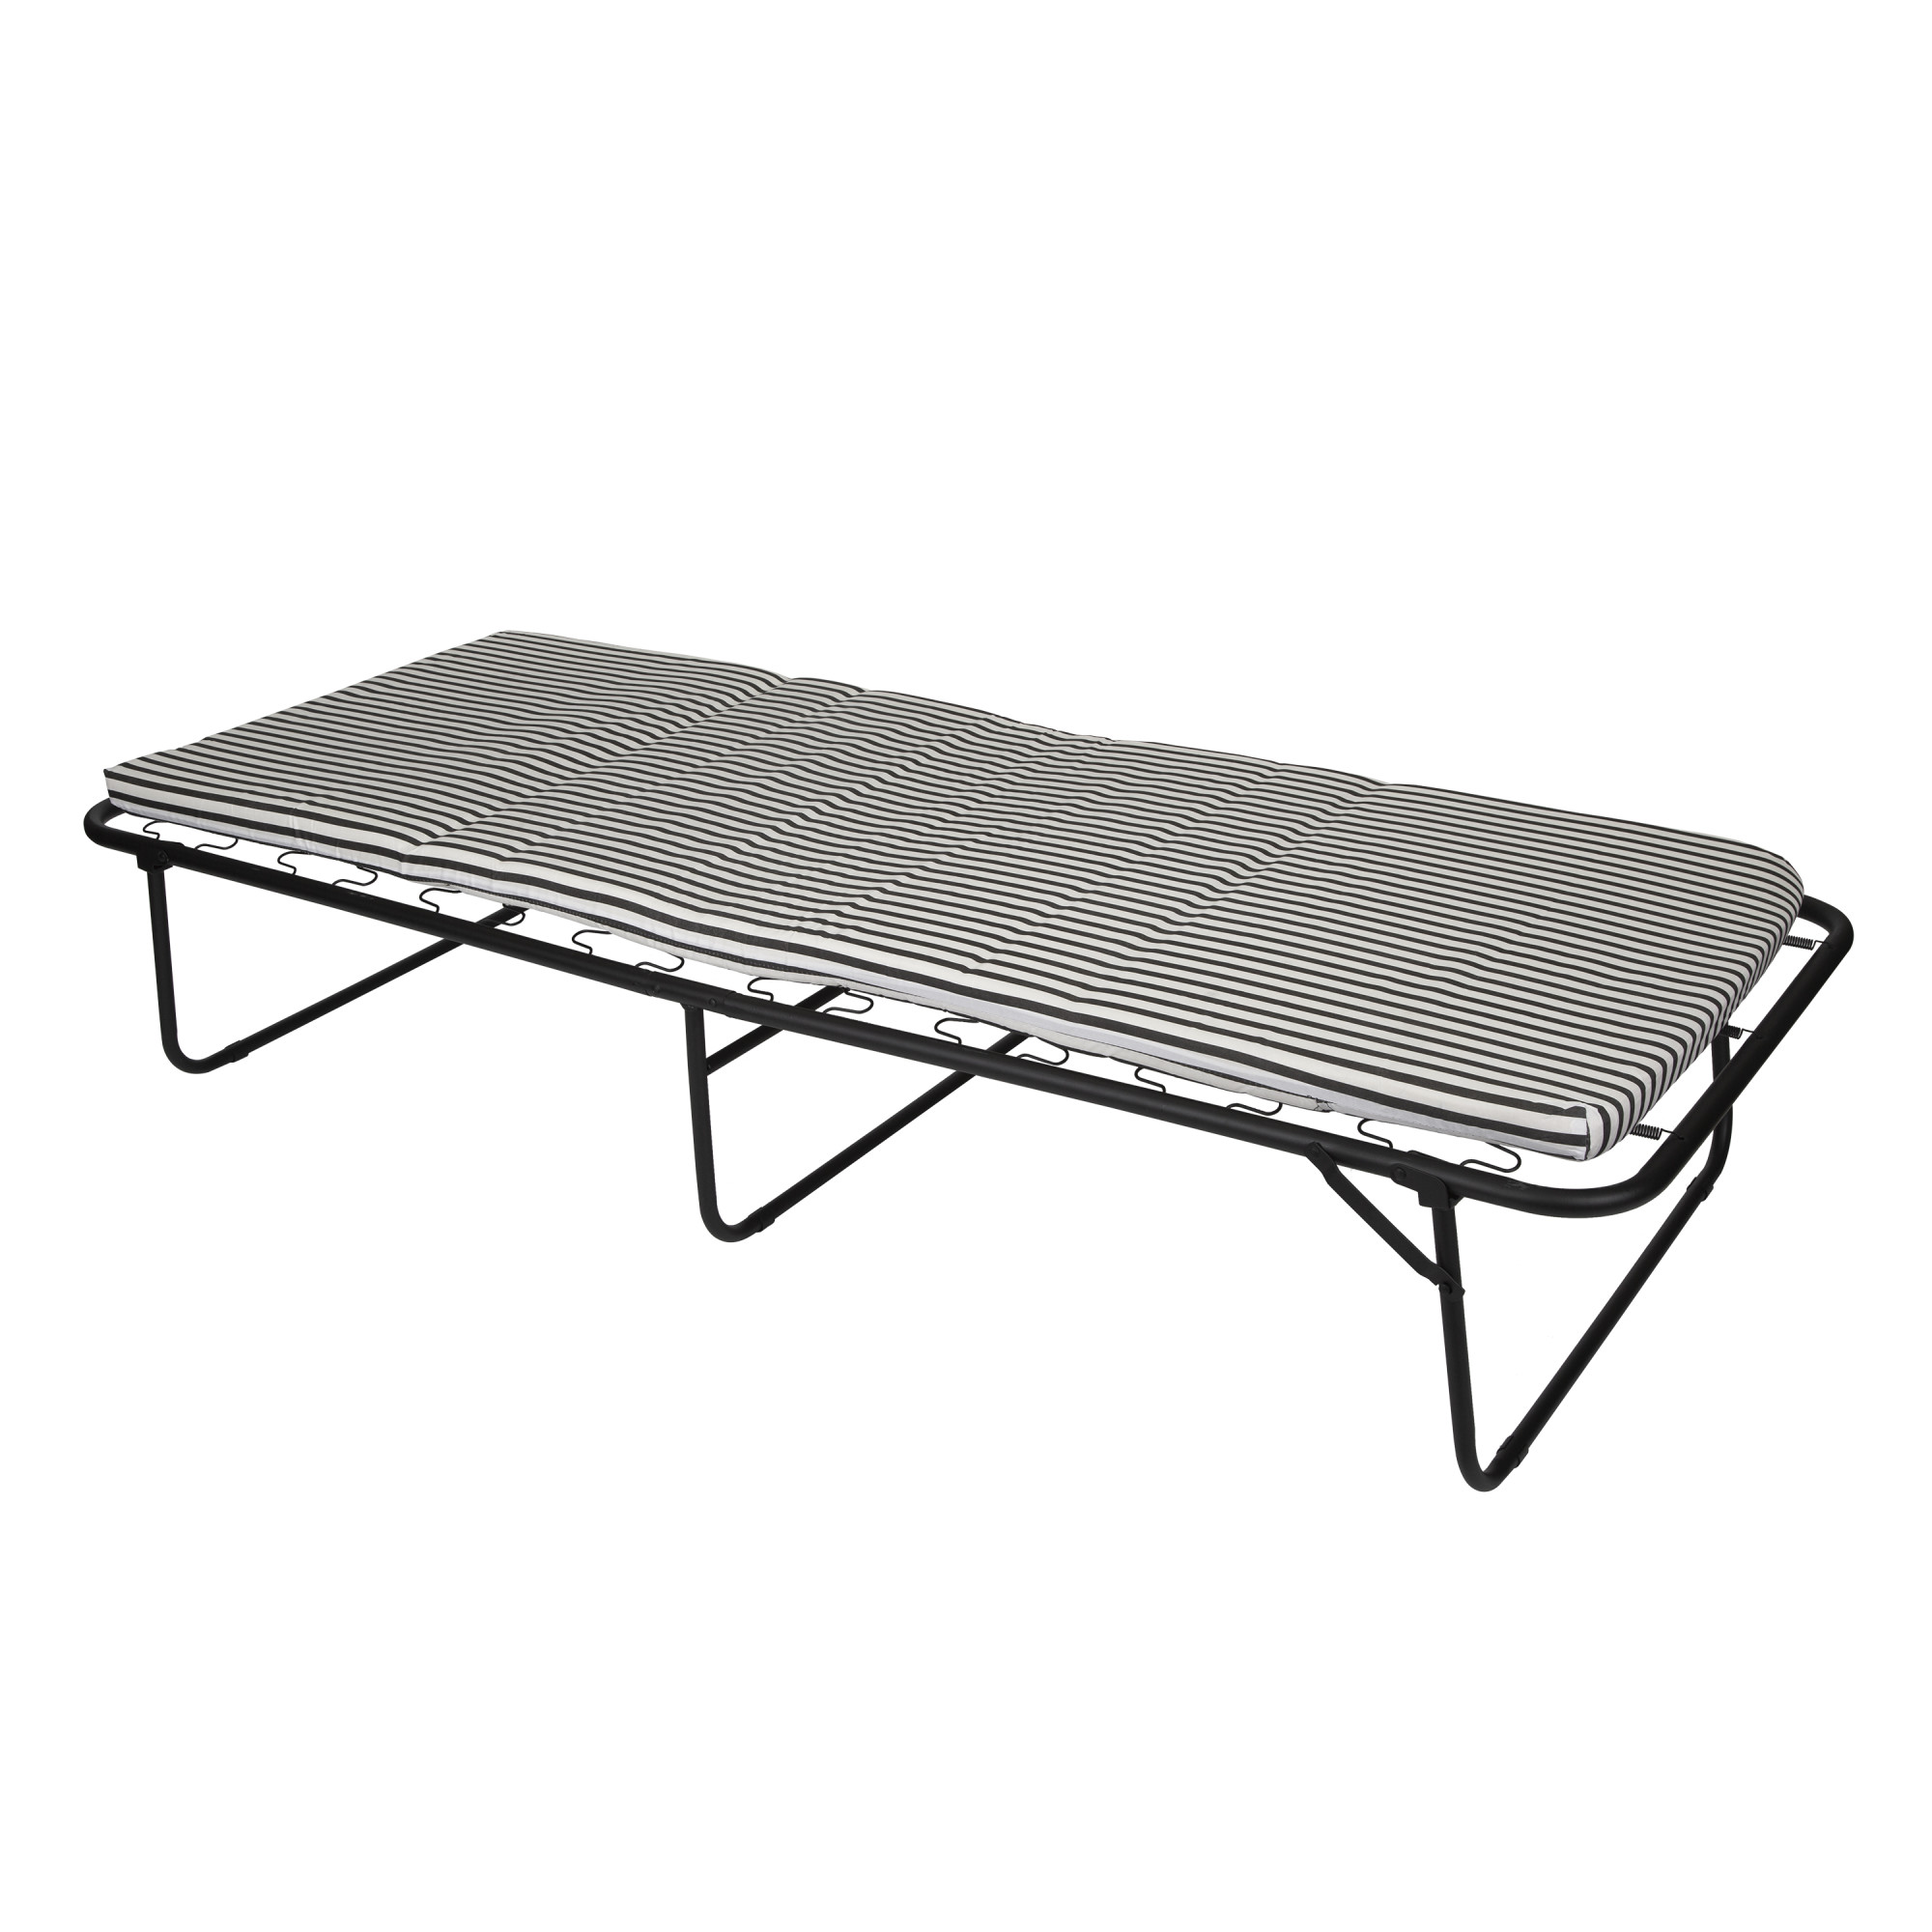 Stansport Steel Cot With Mattress - 75" x 31" x 13-1/2" - image 1 of 12